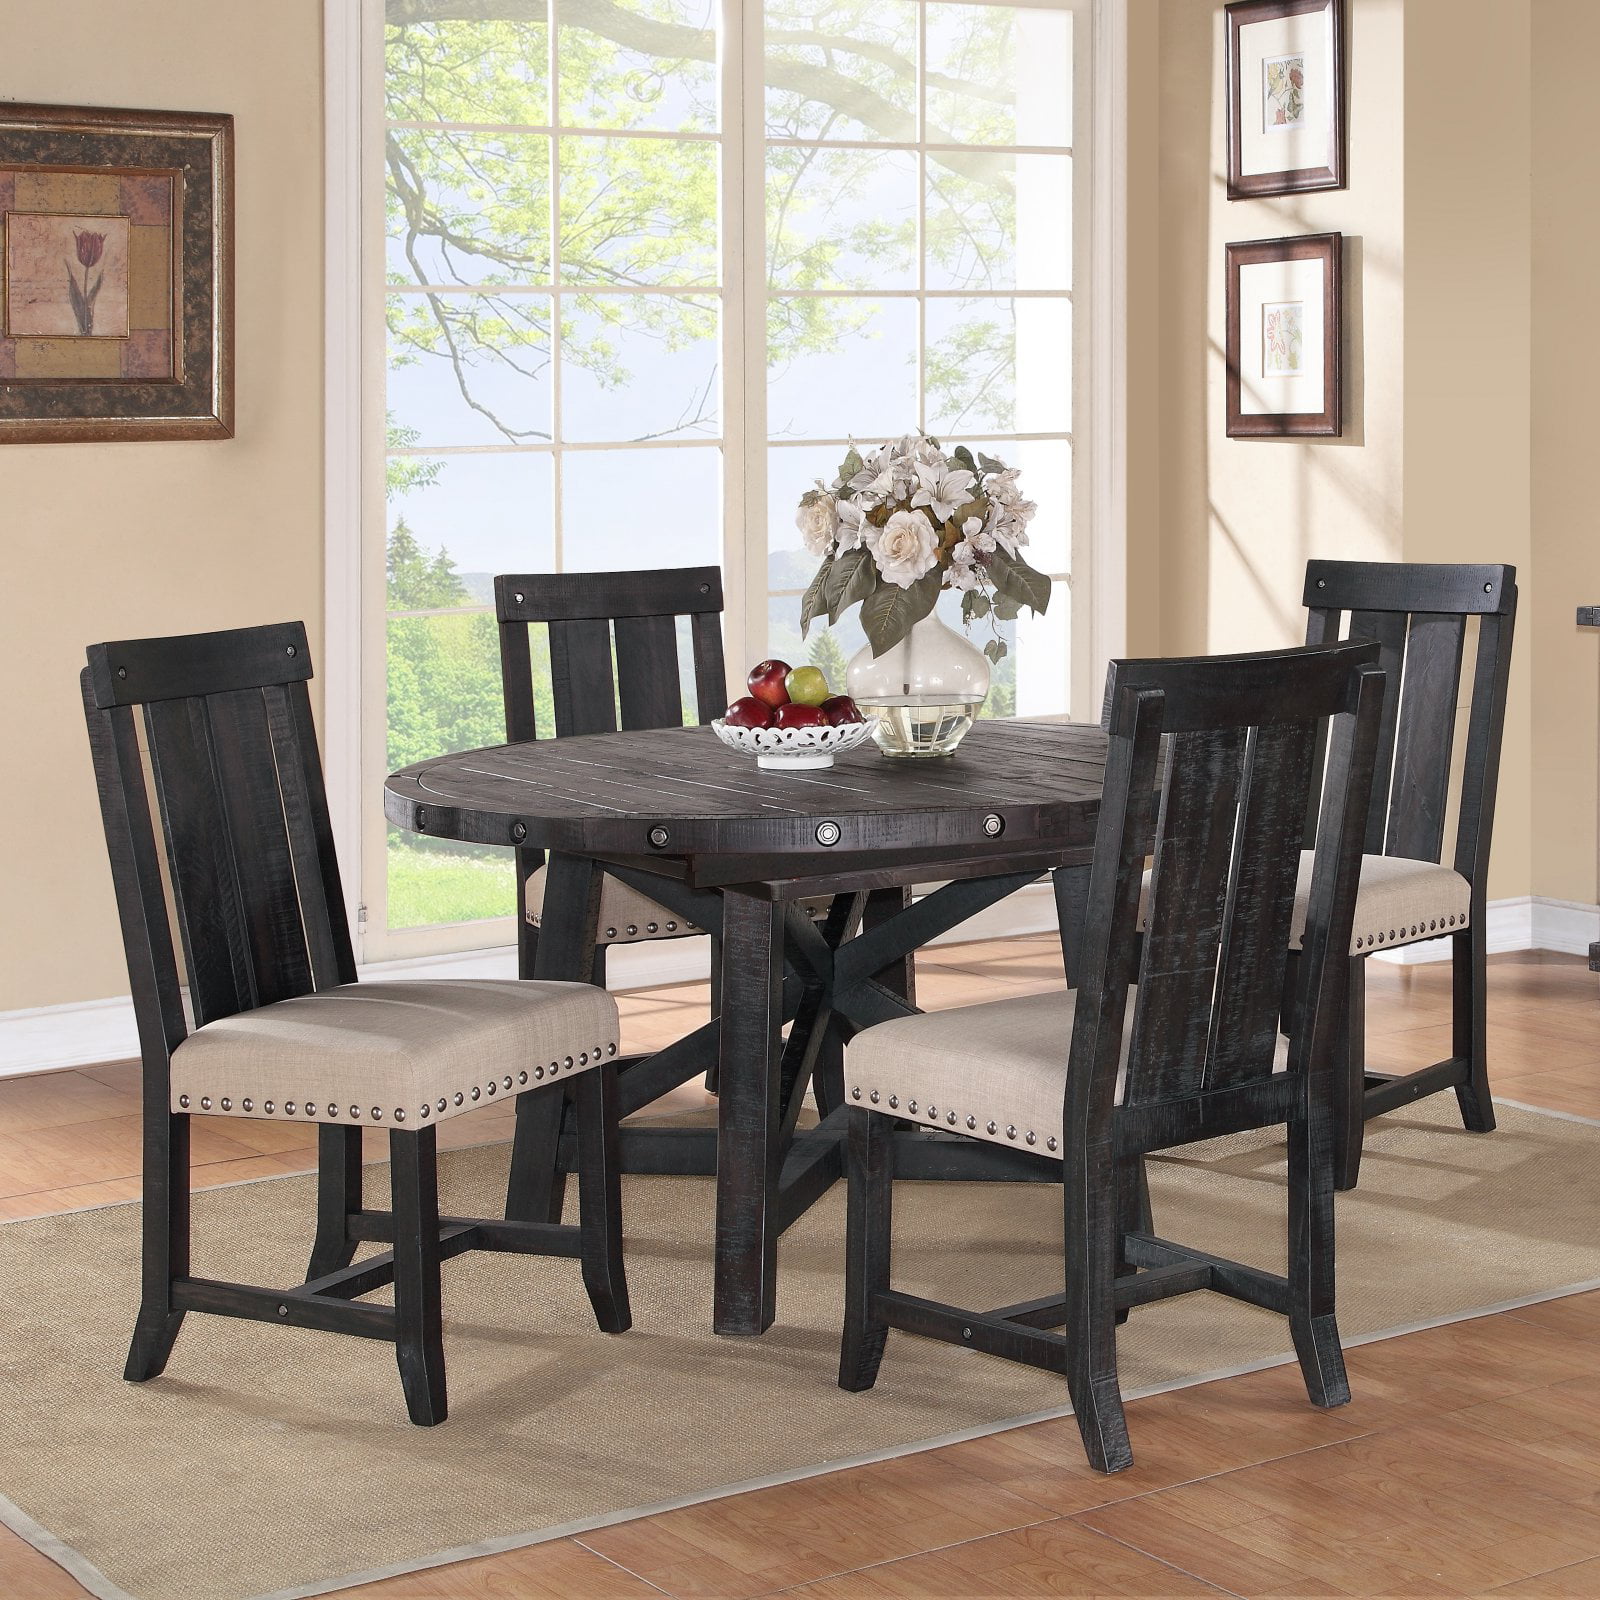 Modus Round Yosemite 5 Piece Round Dining Table Set with Wood Chairs ...